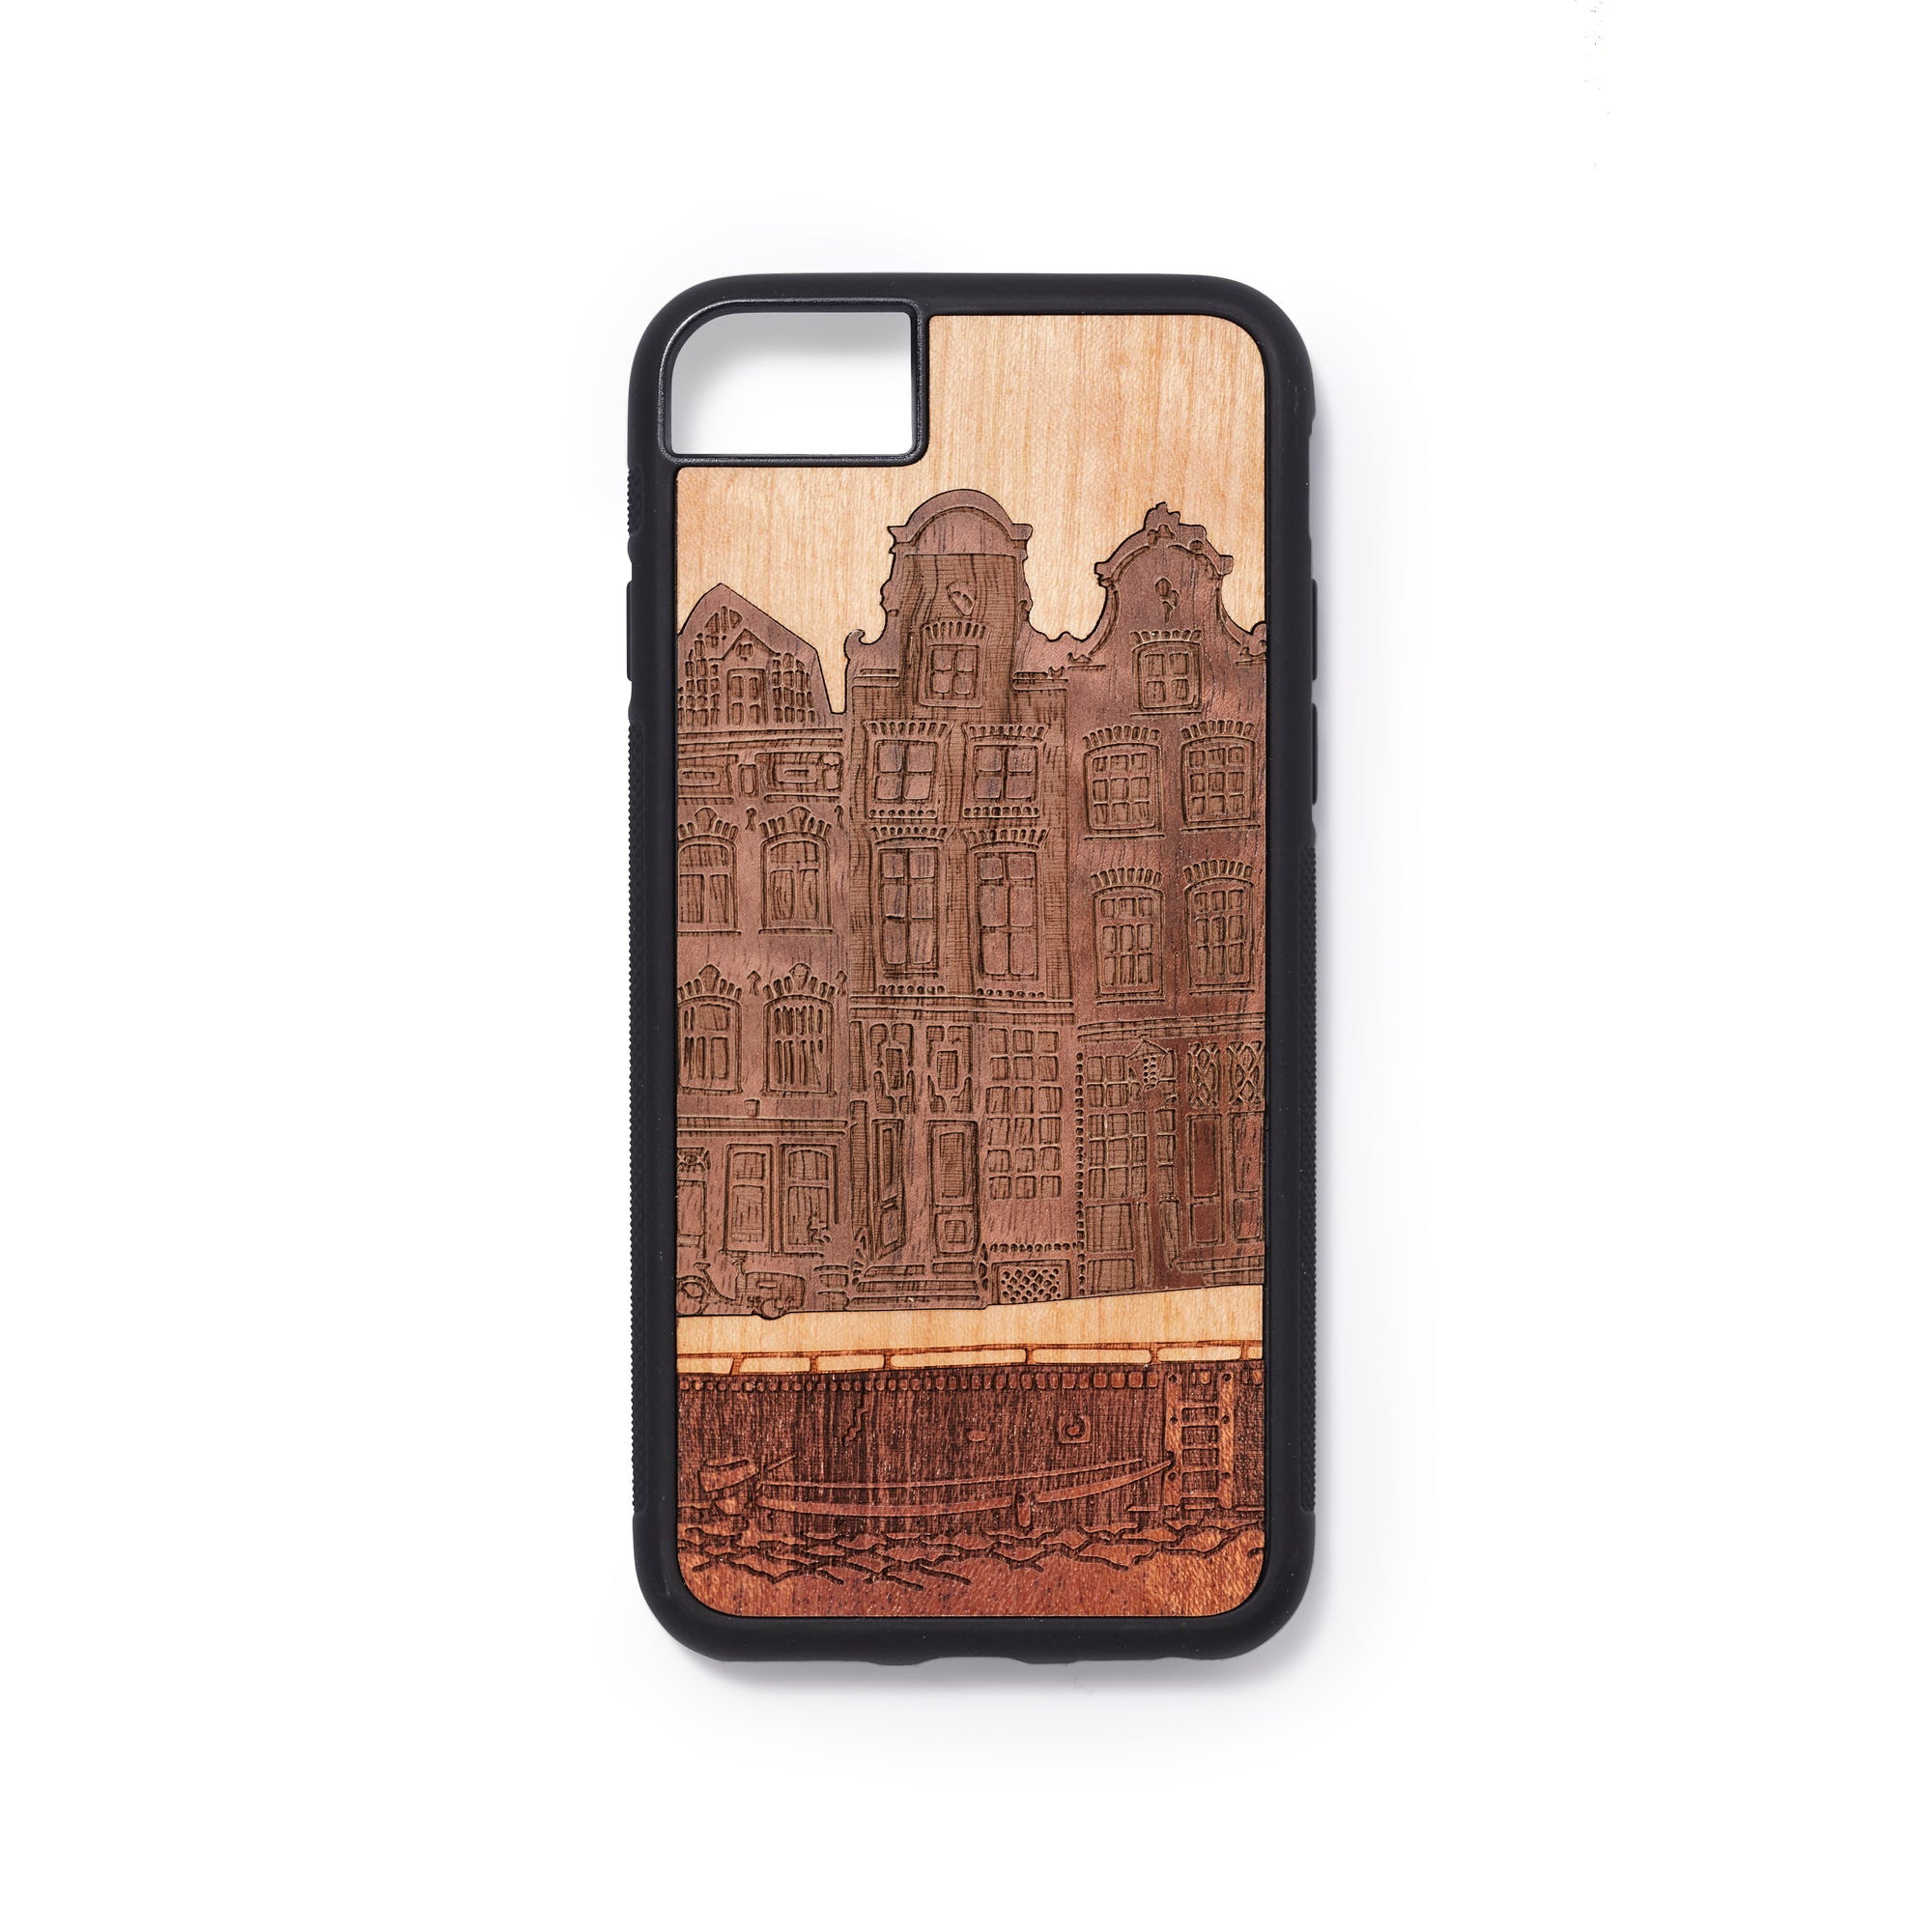 Wooden Iphone 6,7 and 8 back case house design - Woodstylz